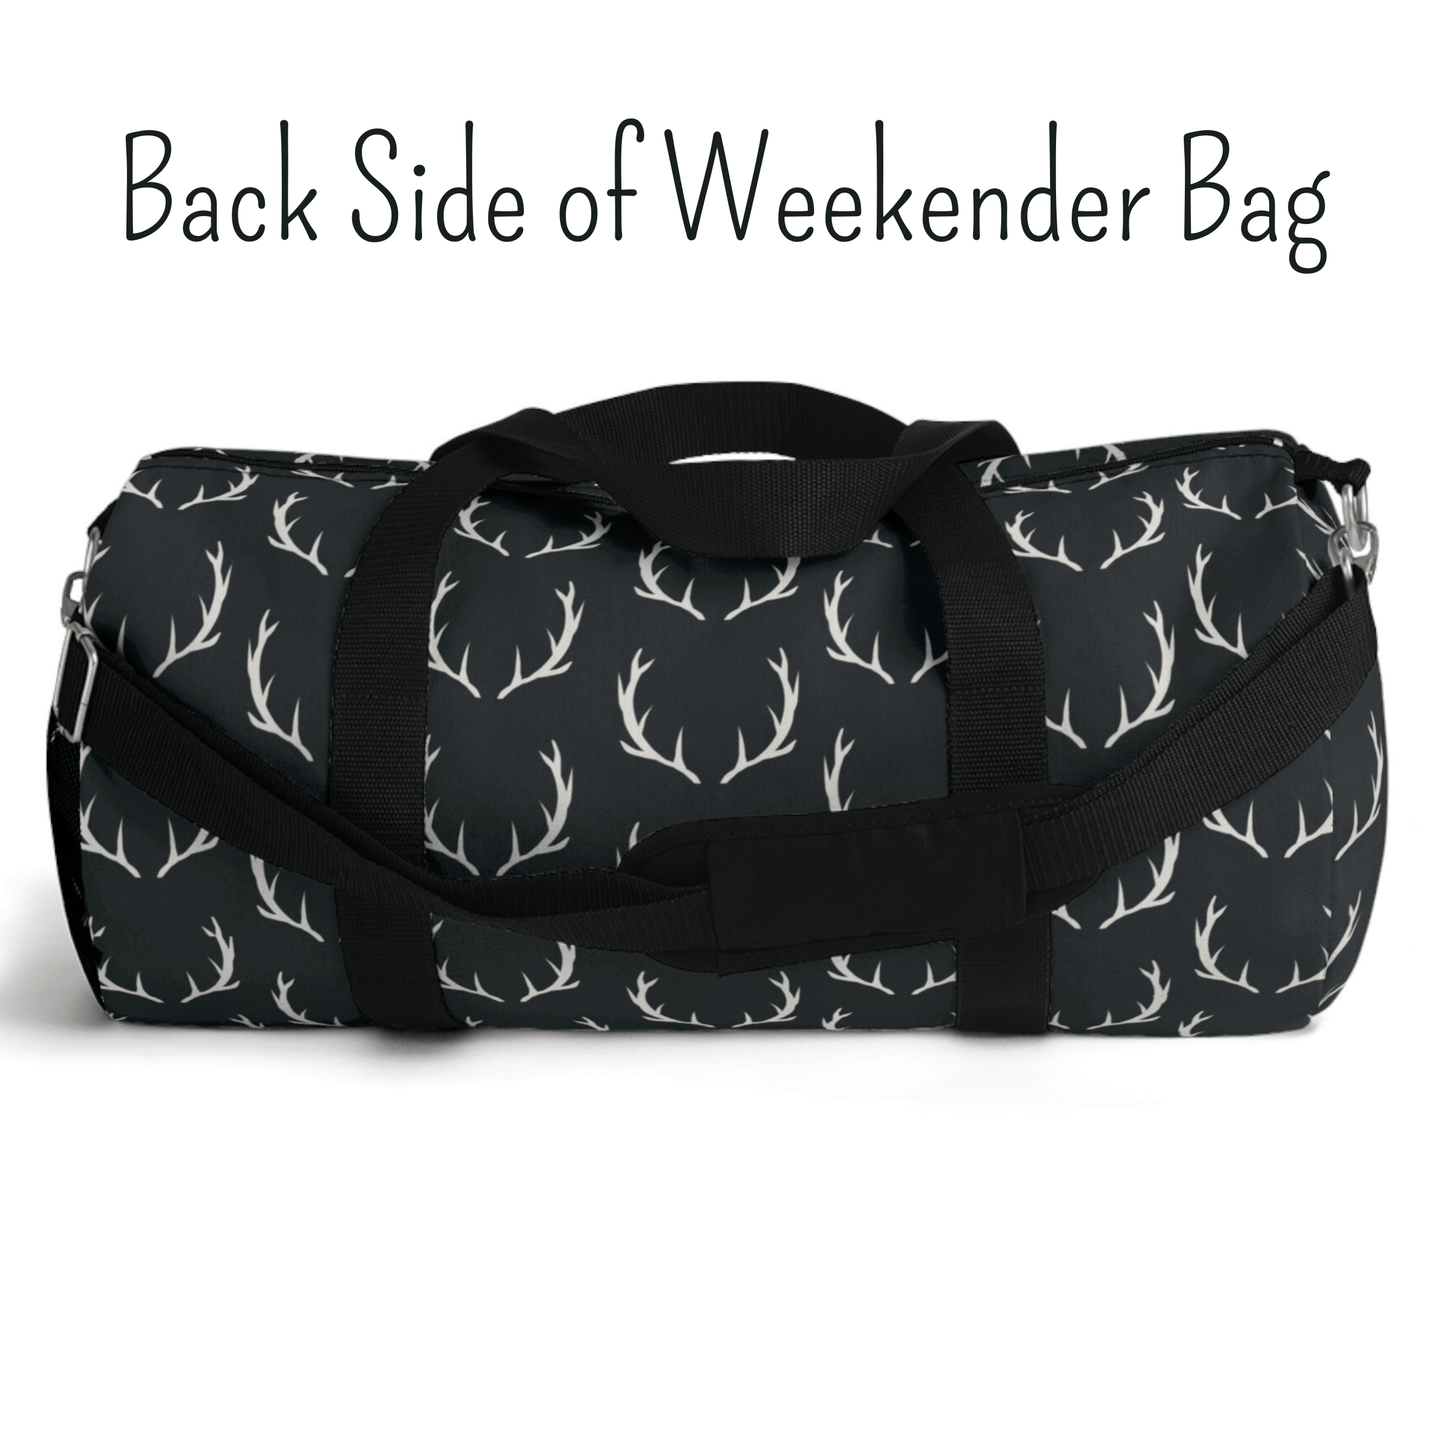 The back side of our weekender bag for deer hunters shows the black with off white antlers and the black carrying handles.